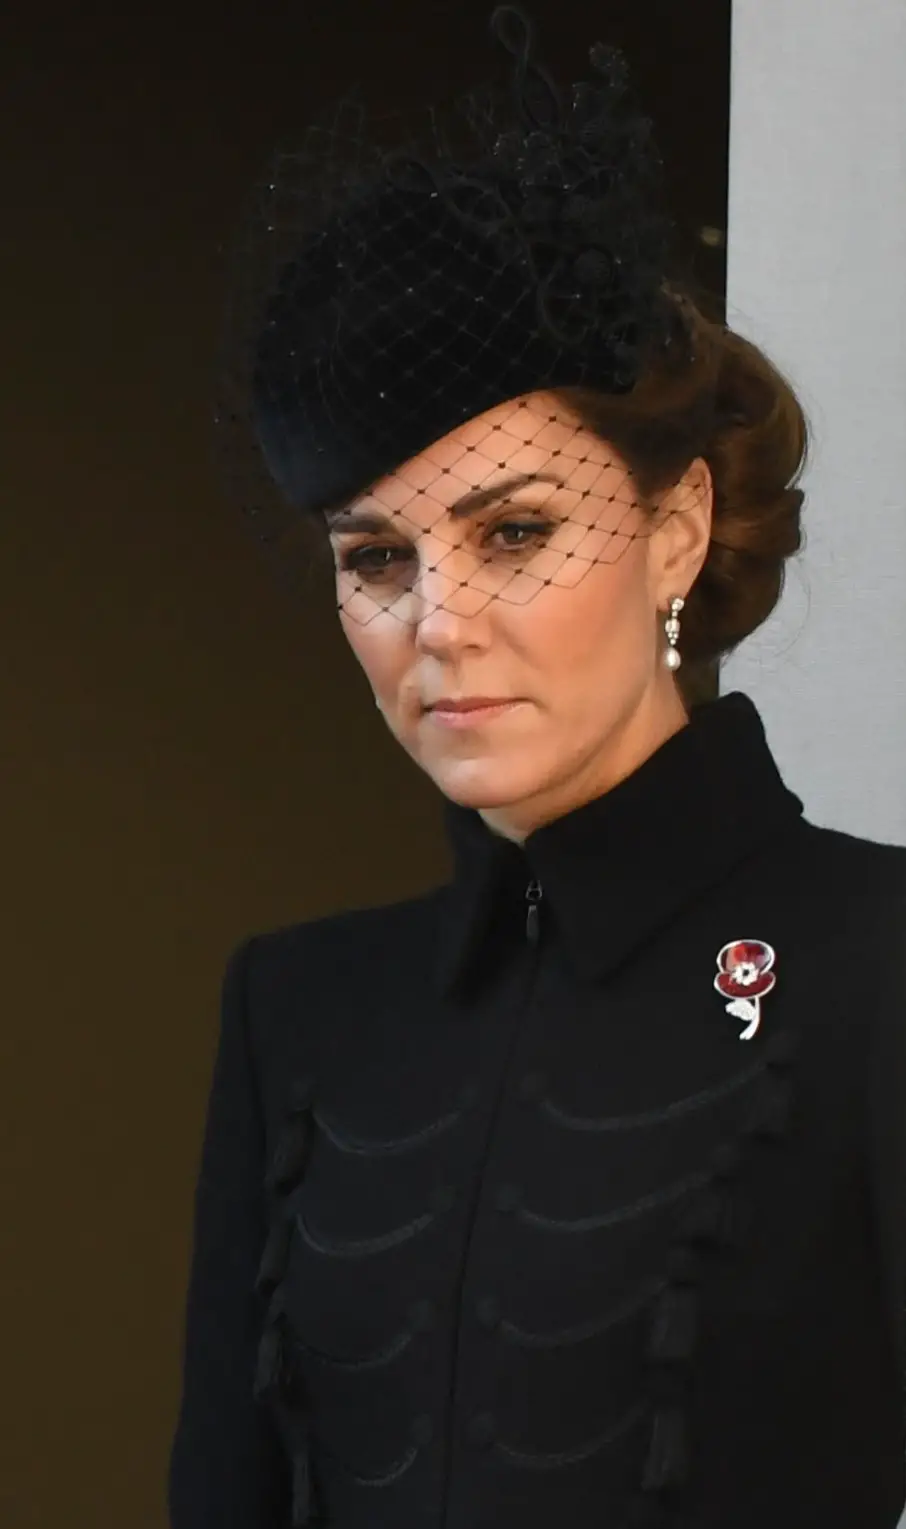 The Duchess of Cambridge wore black Catherine Walker Coat and Philip Treacy Hat at 2019 Remembrance Sunday Service